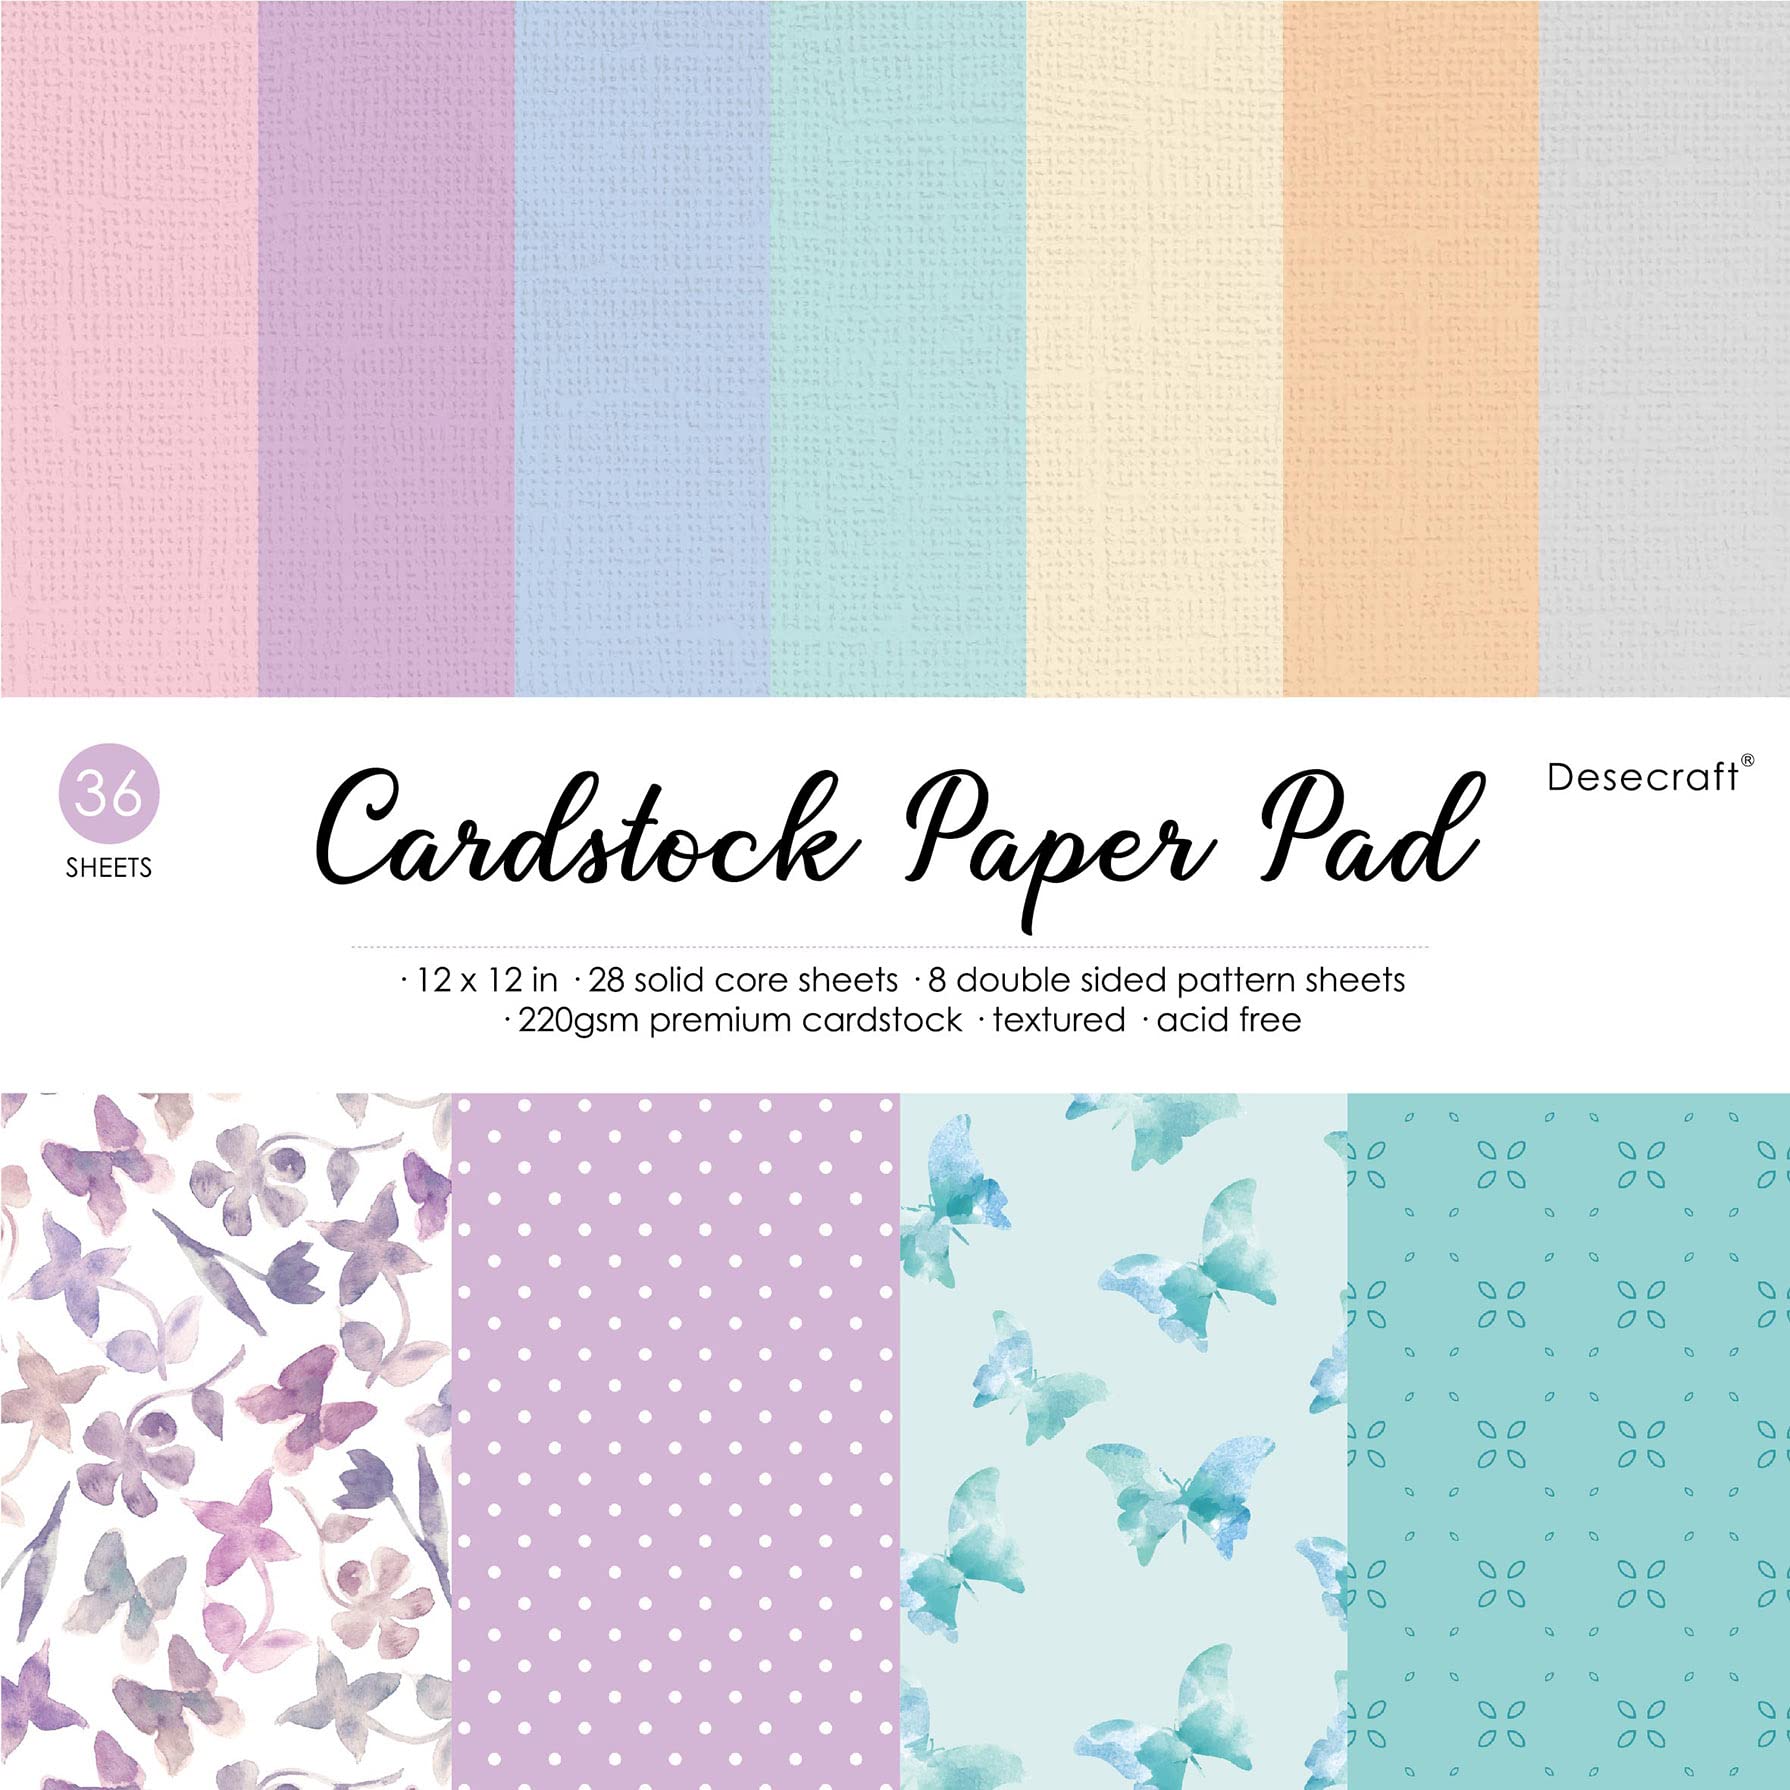 Scrapbooking Paper 12 x 12 Inch, 24 Sheets Craft Scrapbook Paper Pad,  Single-Side Printing Cardstock Paper Supplies for Crafting Card Making